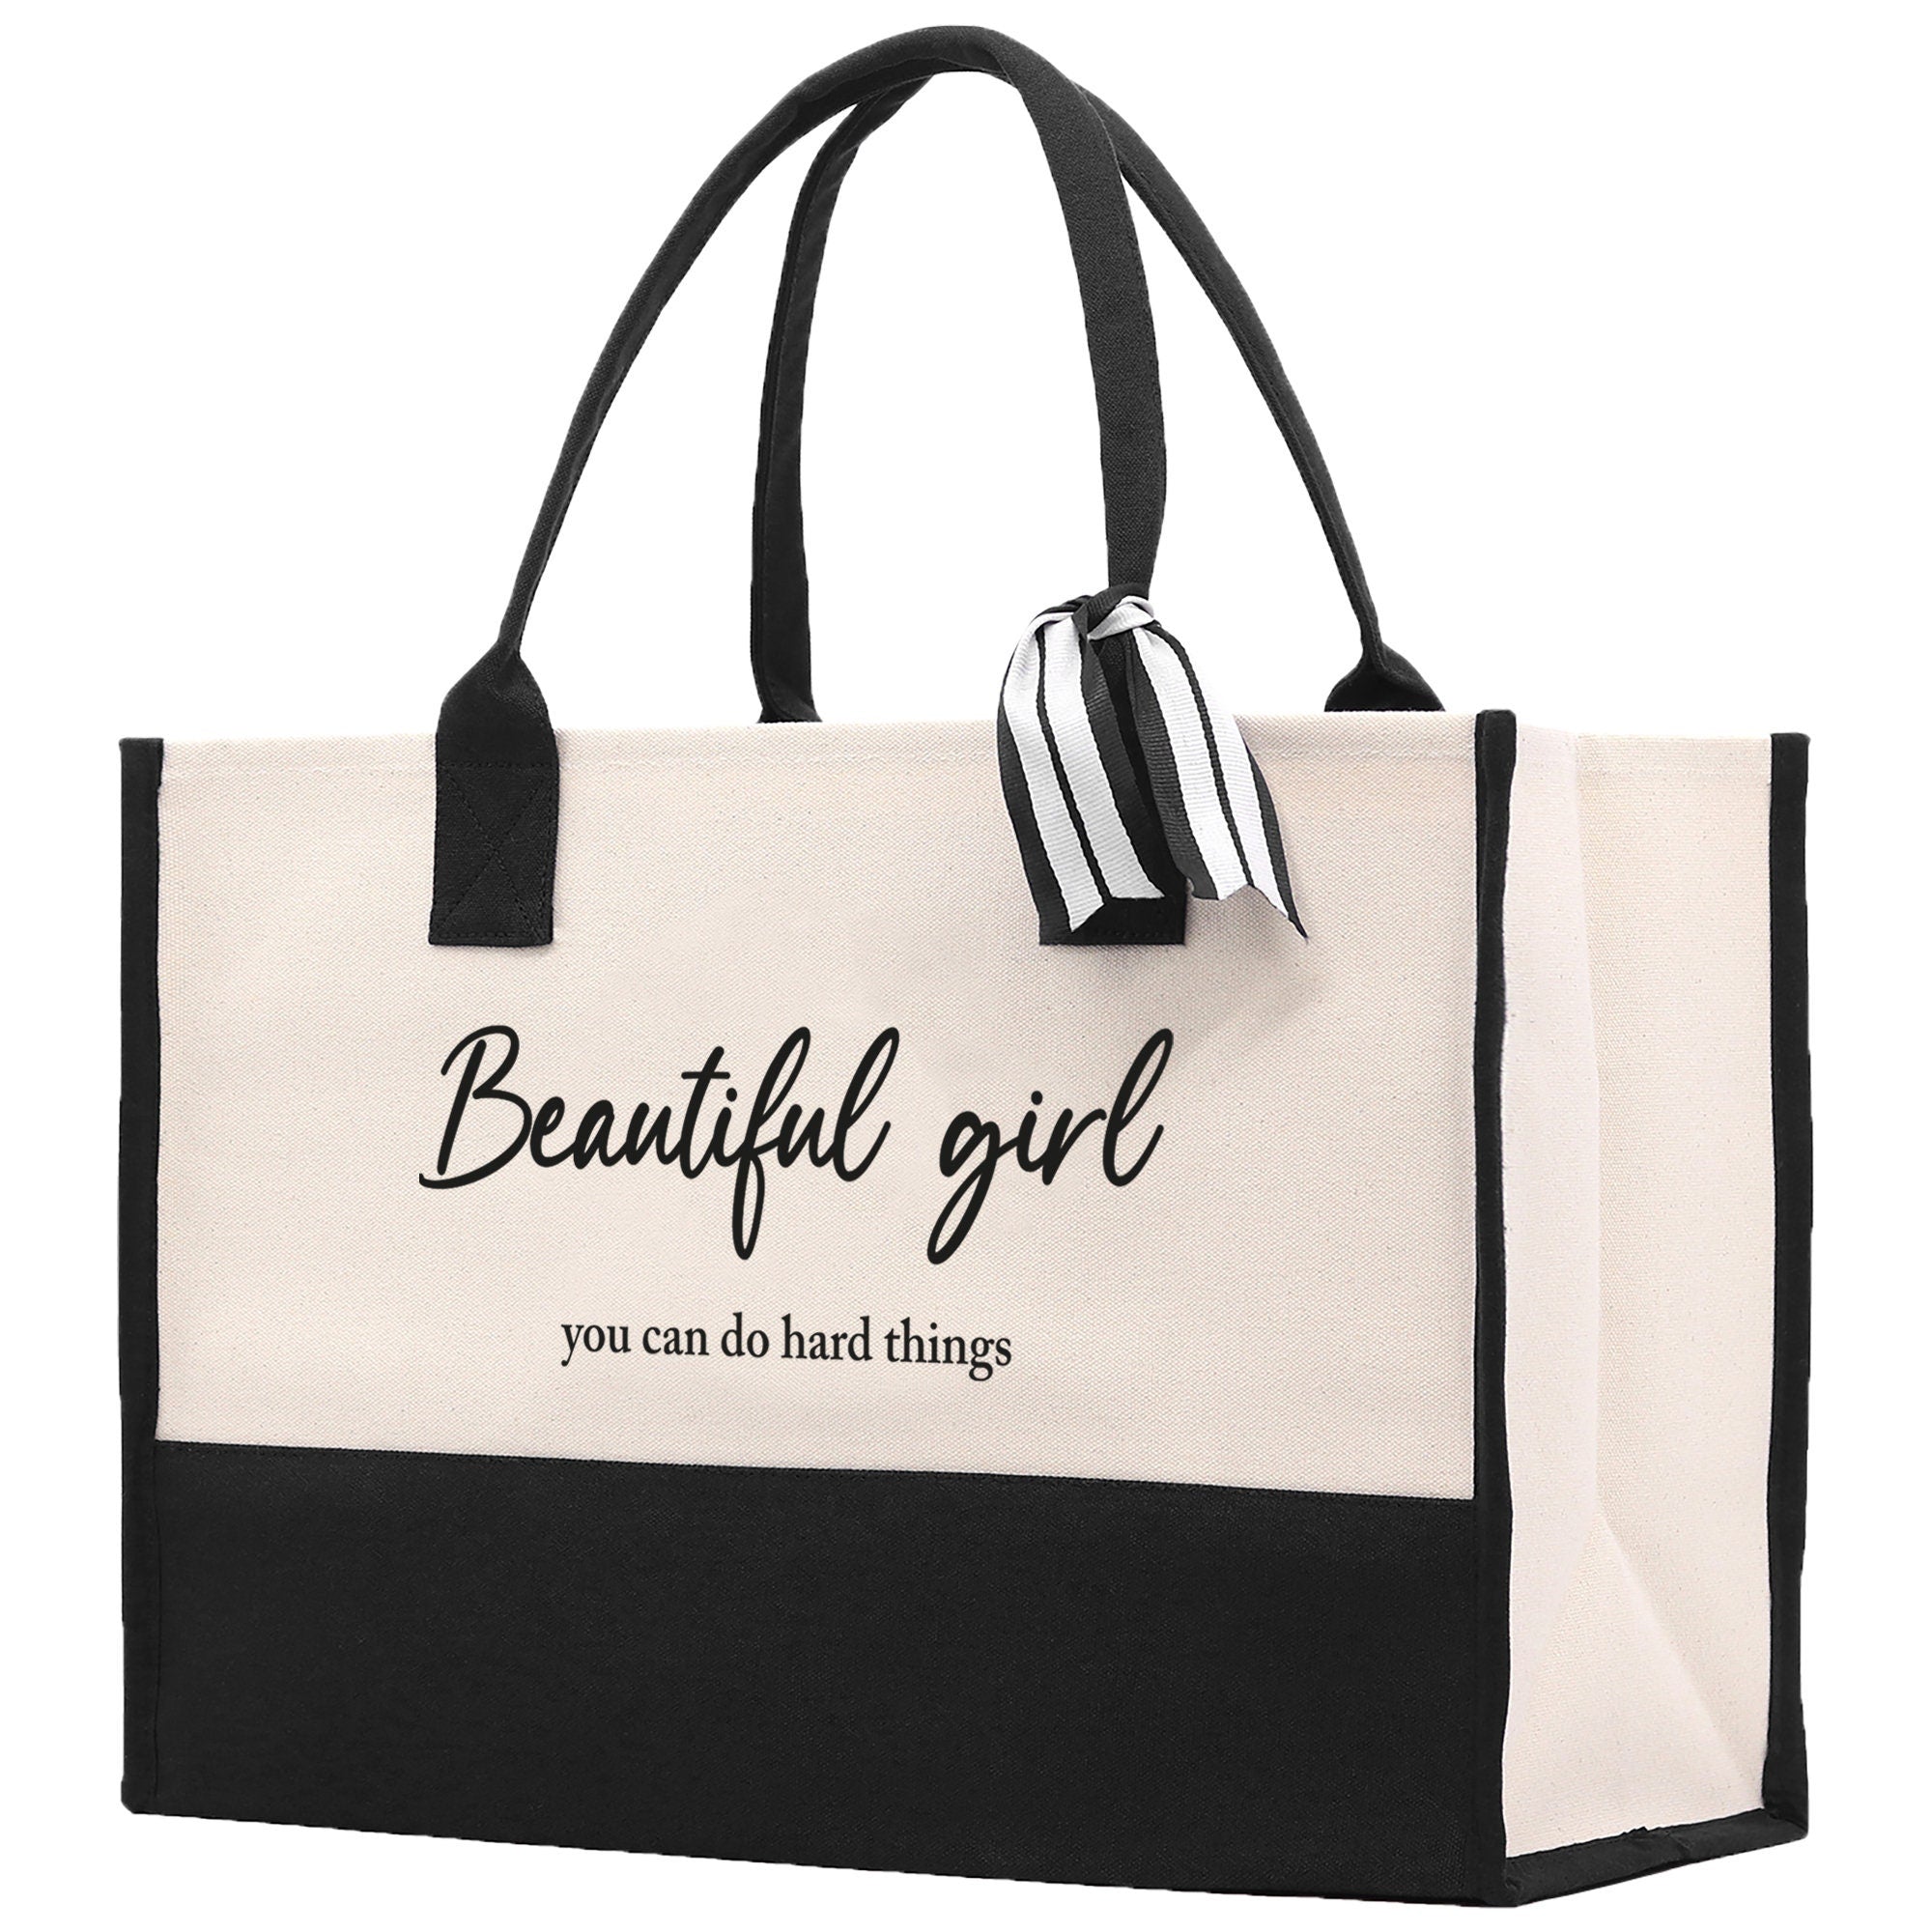 Beautiful Girl You Can Do Hard Things Canvas Tote Bag Birthday Gift for Her Weekender Tote Bag Beach Tote Bag Large Beach Tote Bag Best Gift